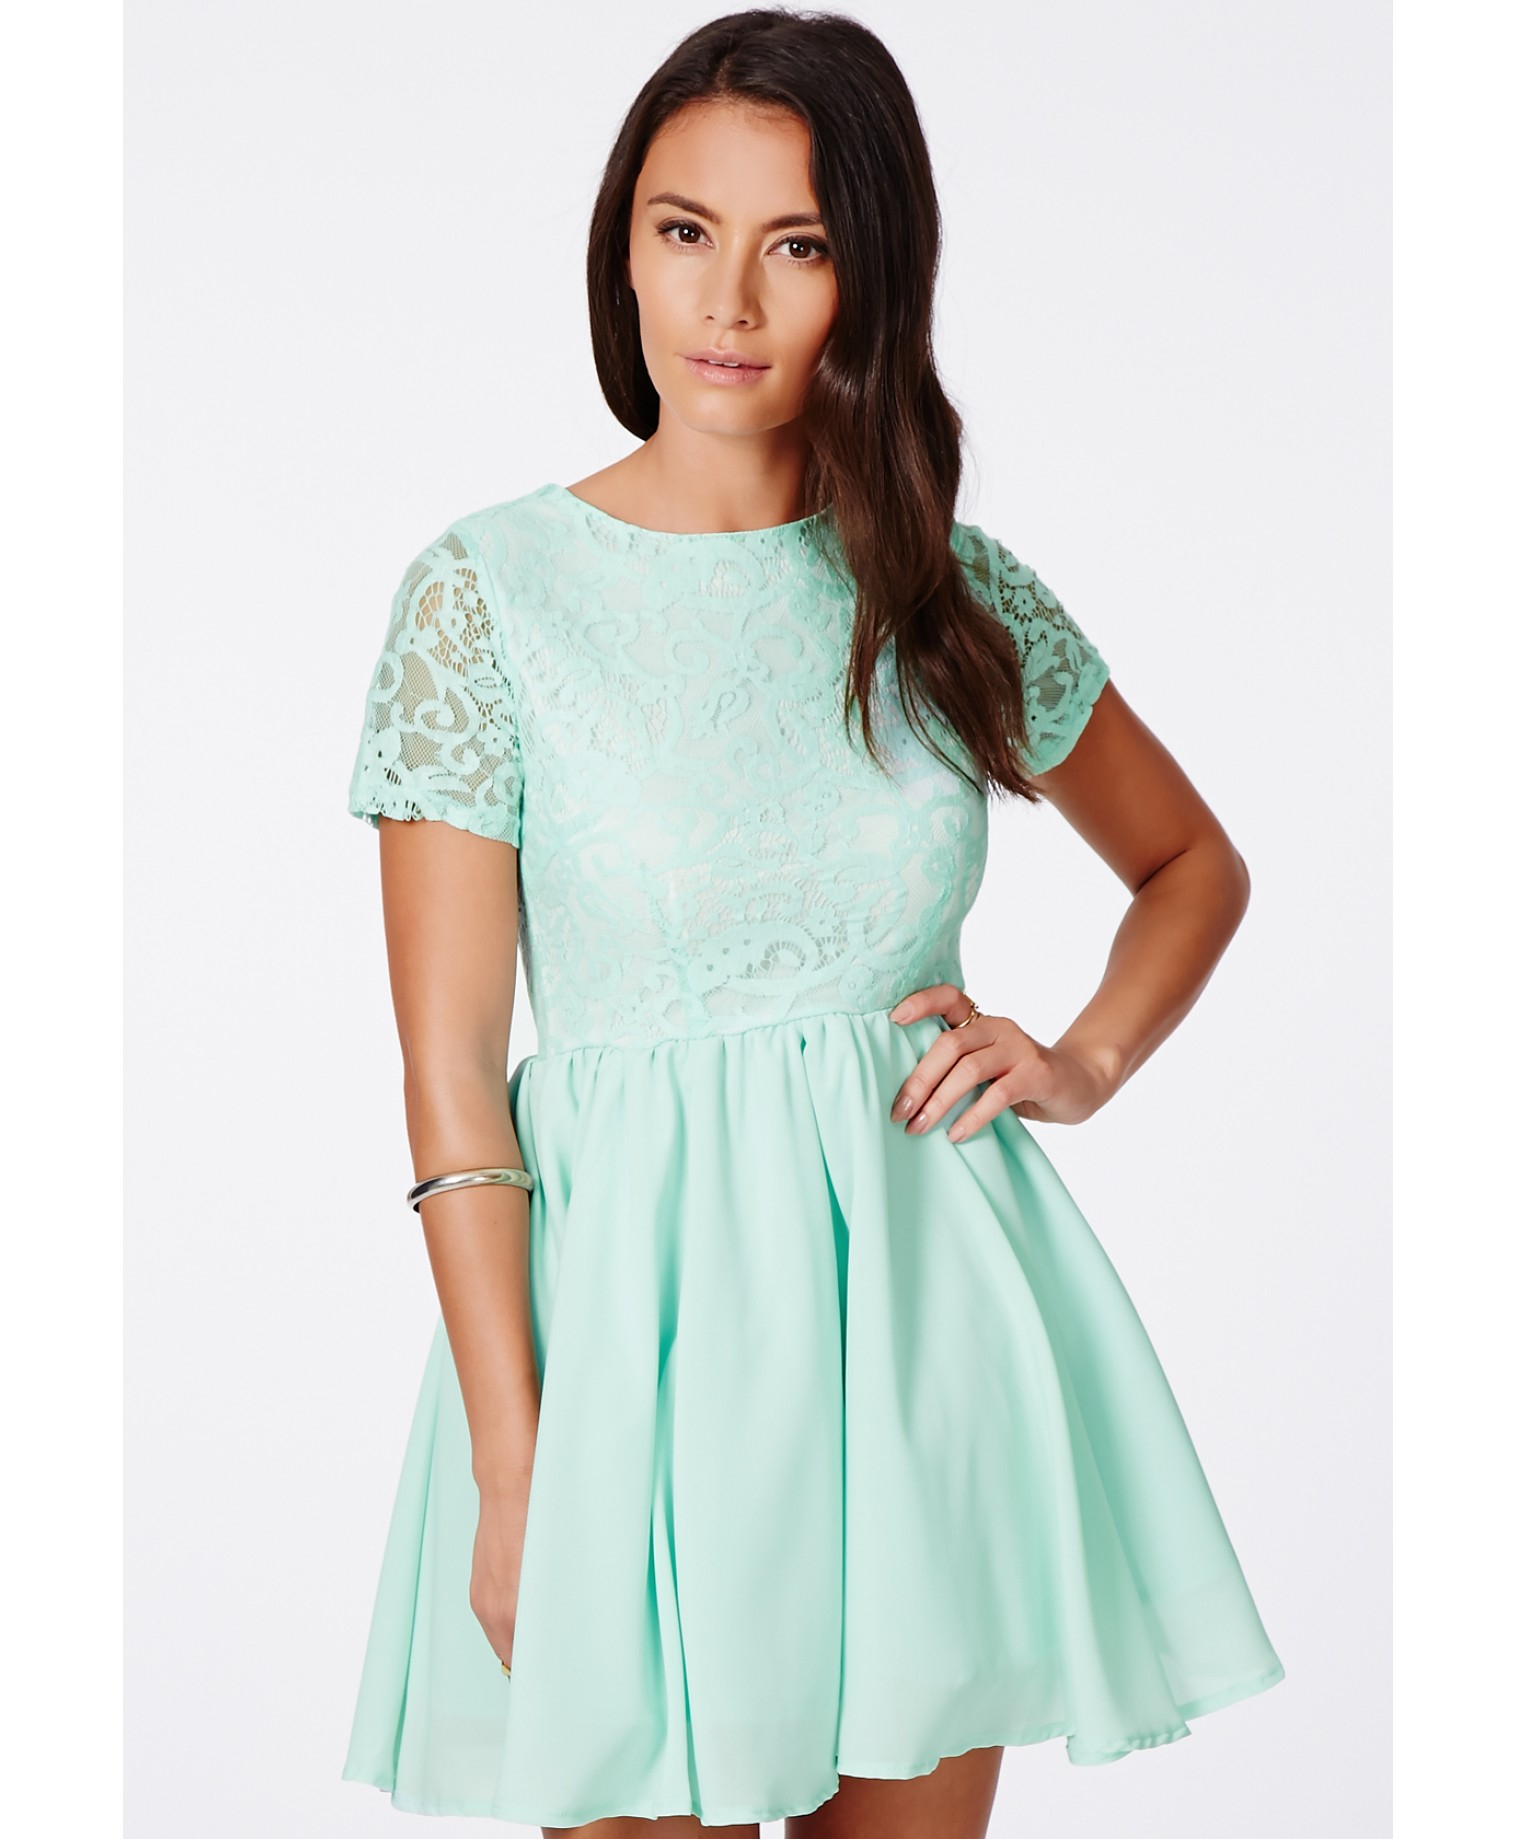 Missguided Green Sofitha Mint Lace Puffball Skater Dress Product 1 21470166 5 318391028 Normal 